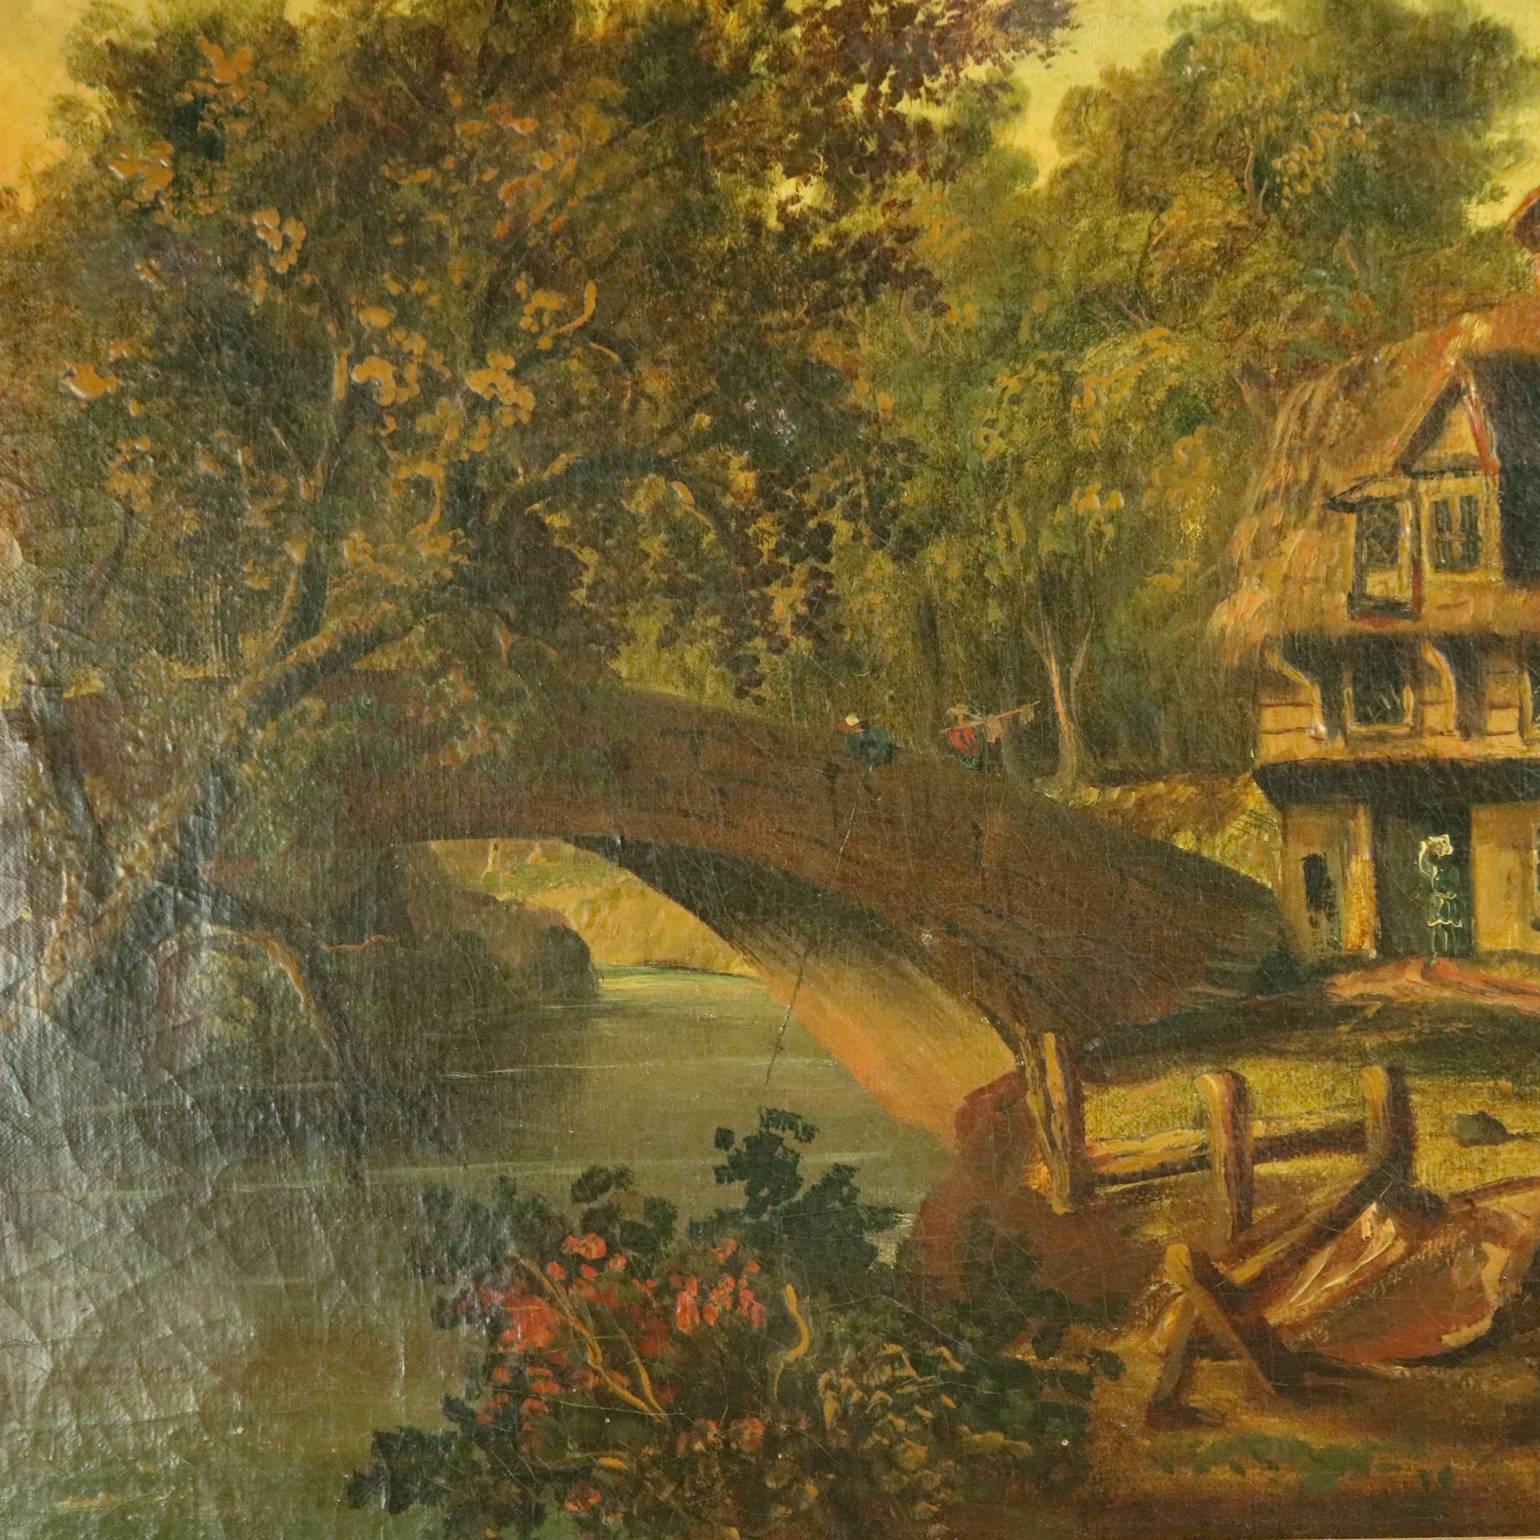 19th century antique European School oil on canvas painting depicts country setting with stone bridge over stream and leading to a Primitive home, unsigned.

Measures: 24" H x 20.5" W framed; 14" H x 18" W sight.